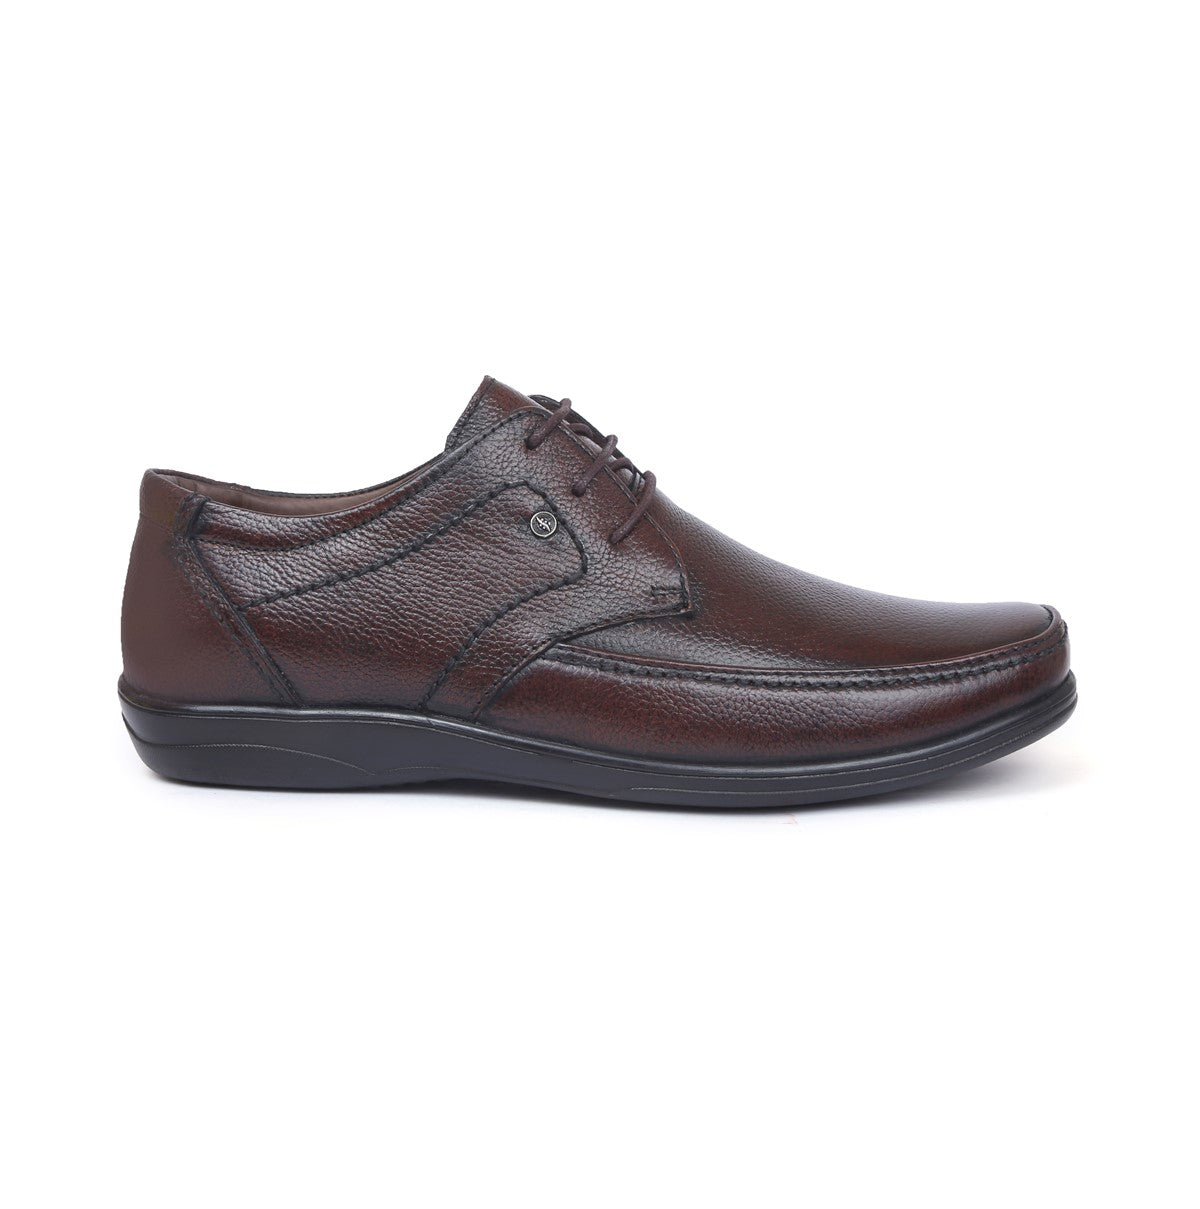 Formal Leather Shoes for Men D-3151_brown1